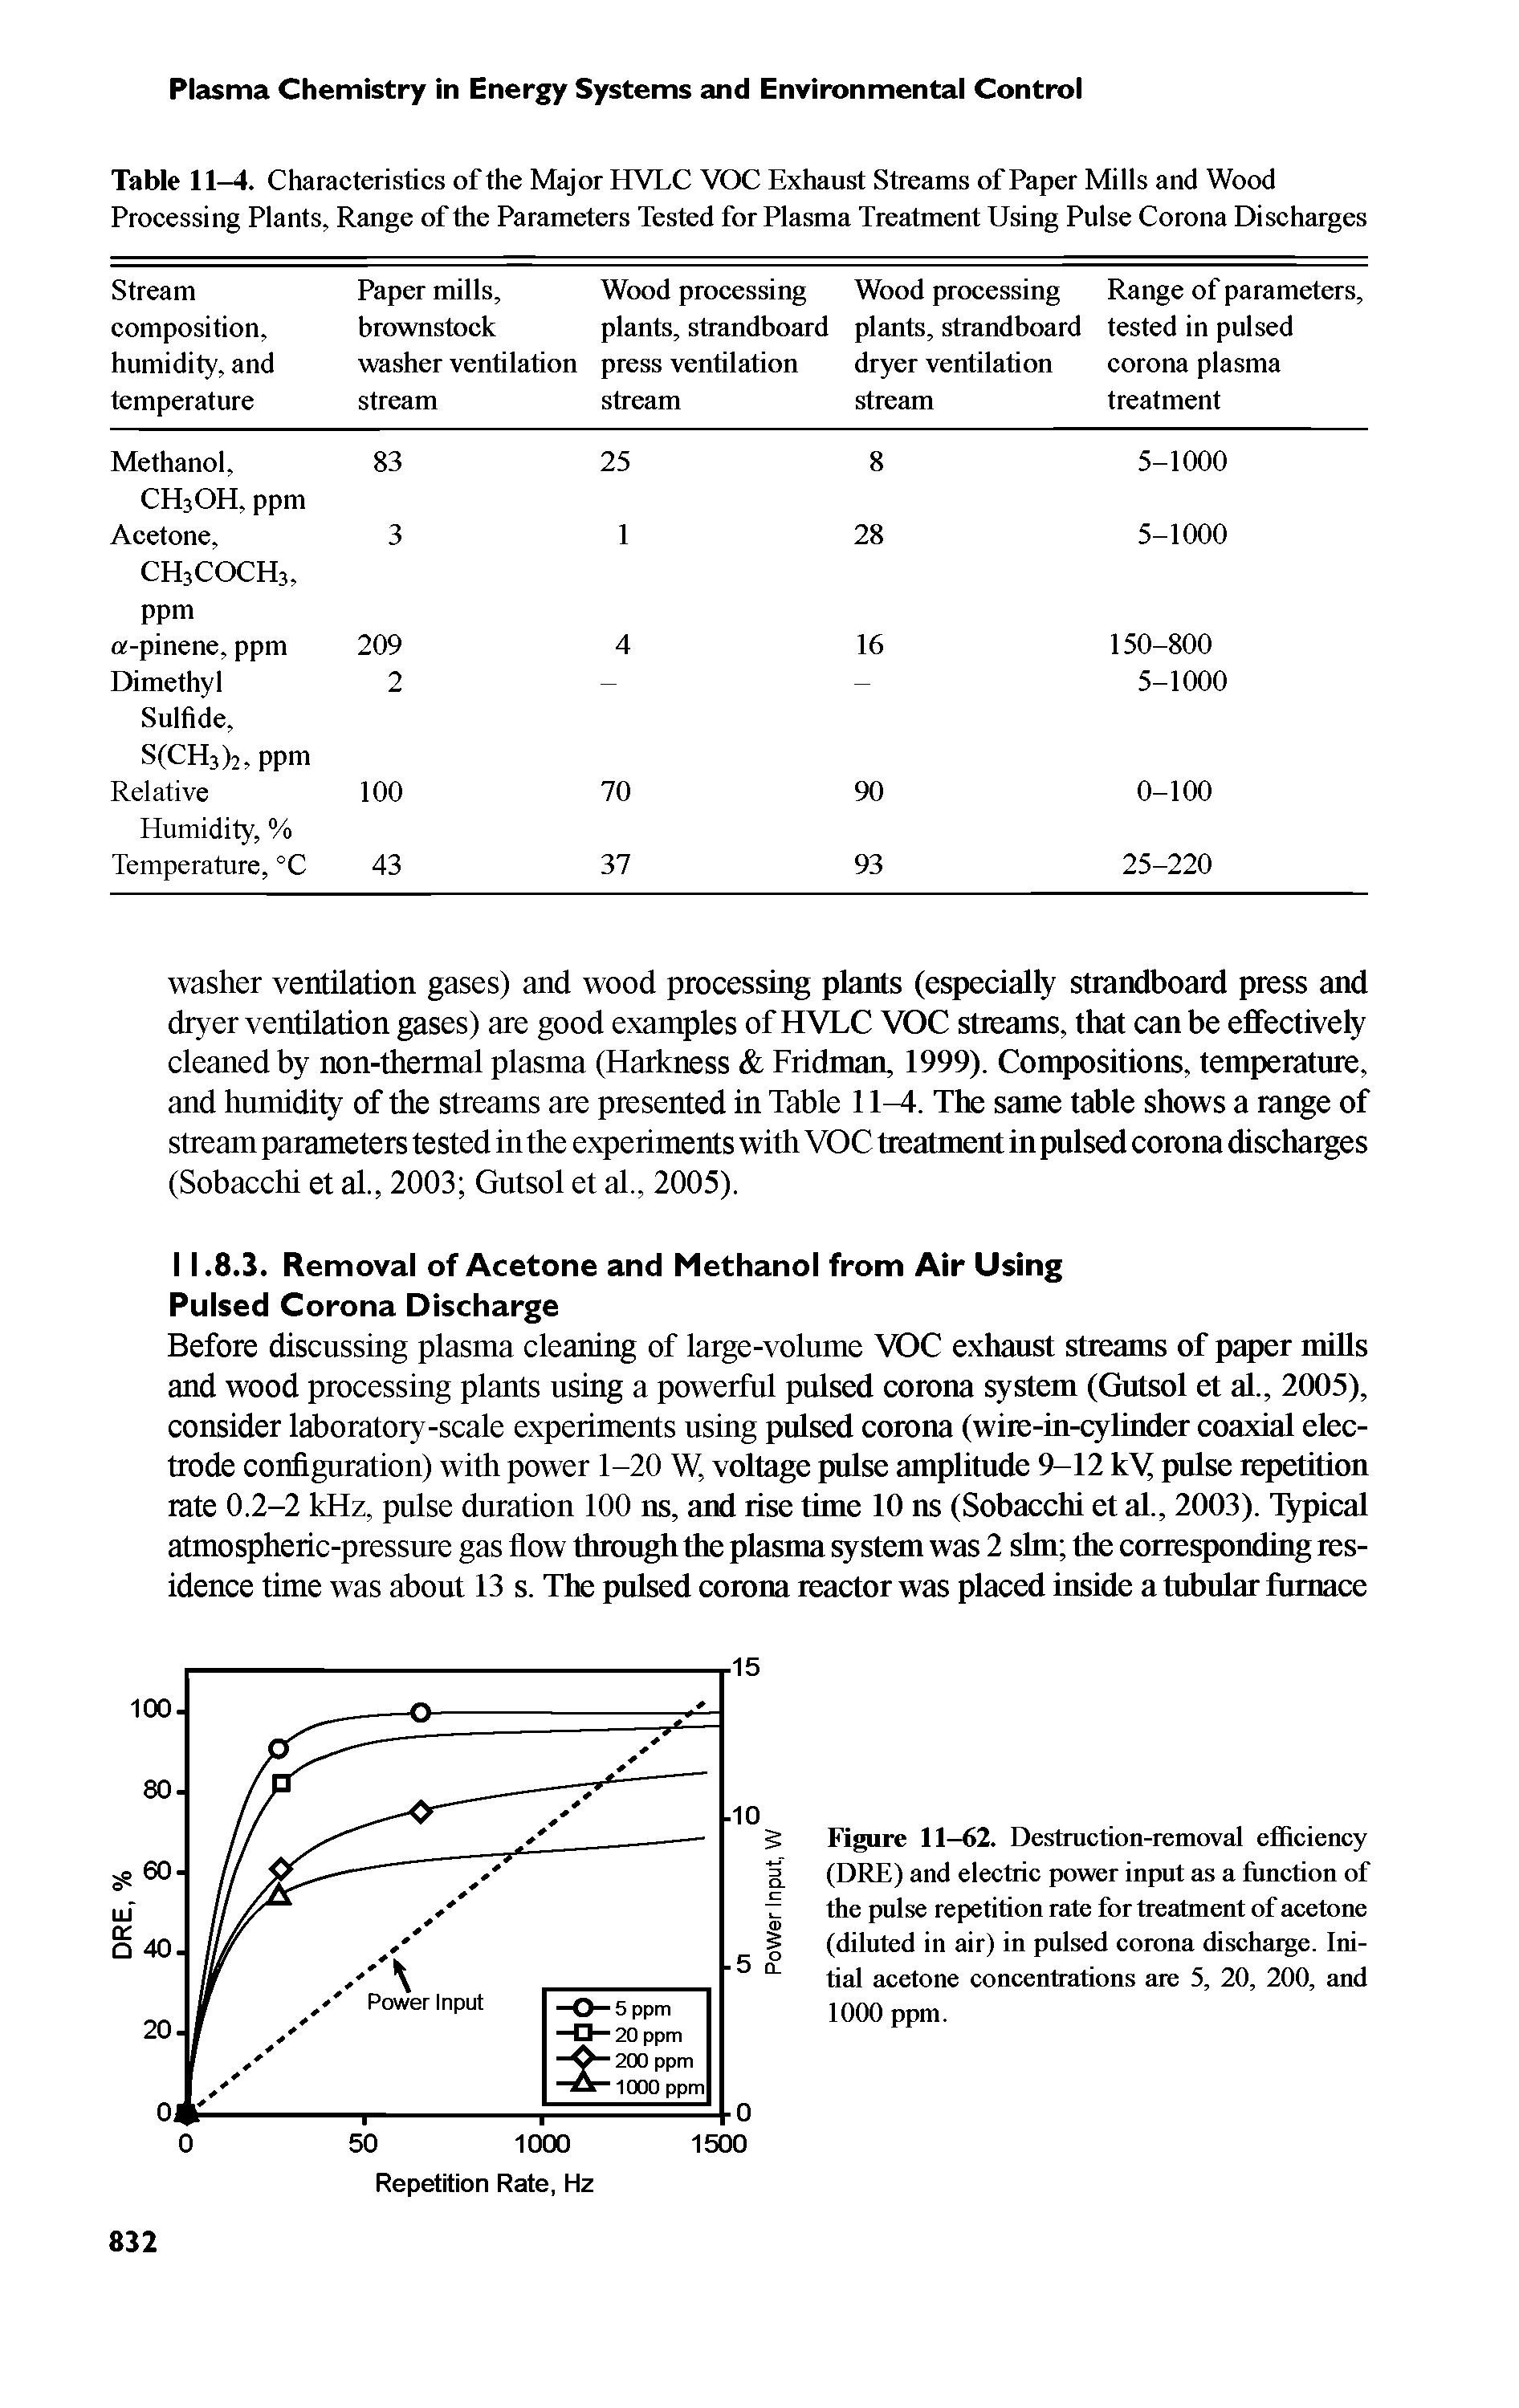 Figure 11-62. Destruction-removal efficiency (DRE) and electric power input as a function of the pulse repetition rate for treatment of acetone (diluted in air) in pulsed corona discharge. Initial acetone concentrations are 5, 20, 200, and 1000 ppm.